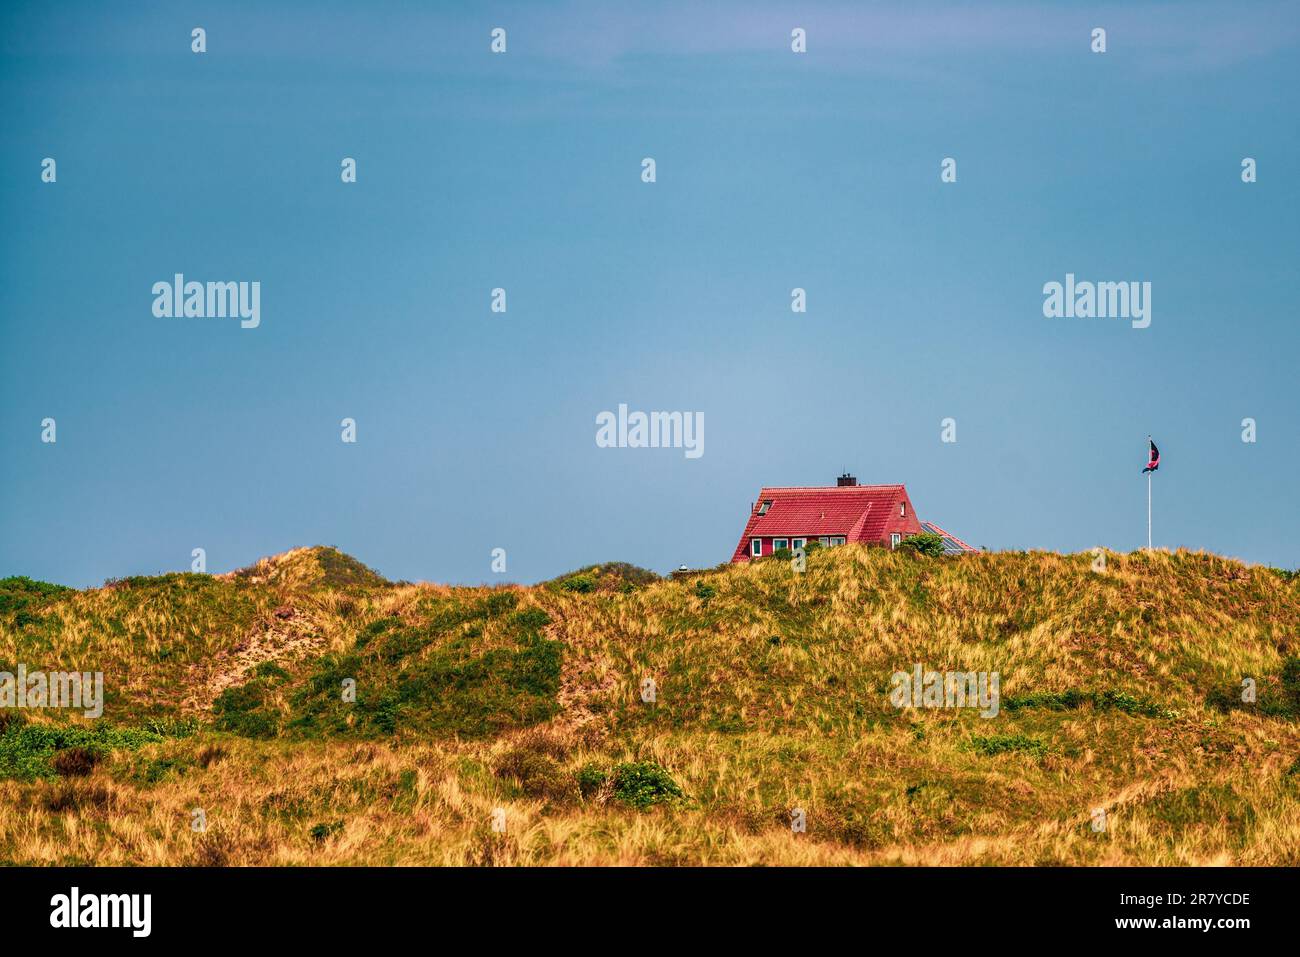 Sand dune and a holiday home on the island of Juist, Germany Stock Photo